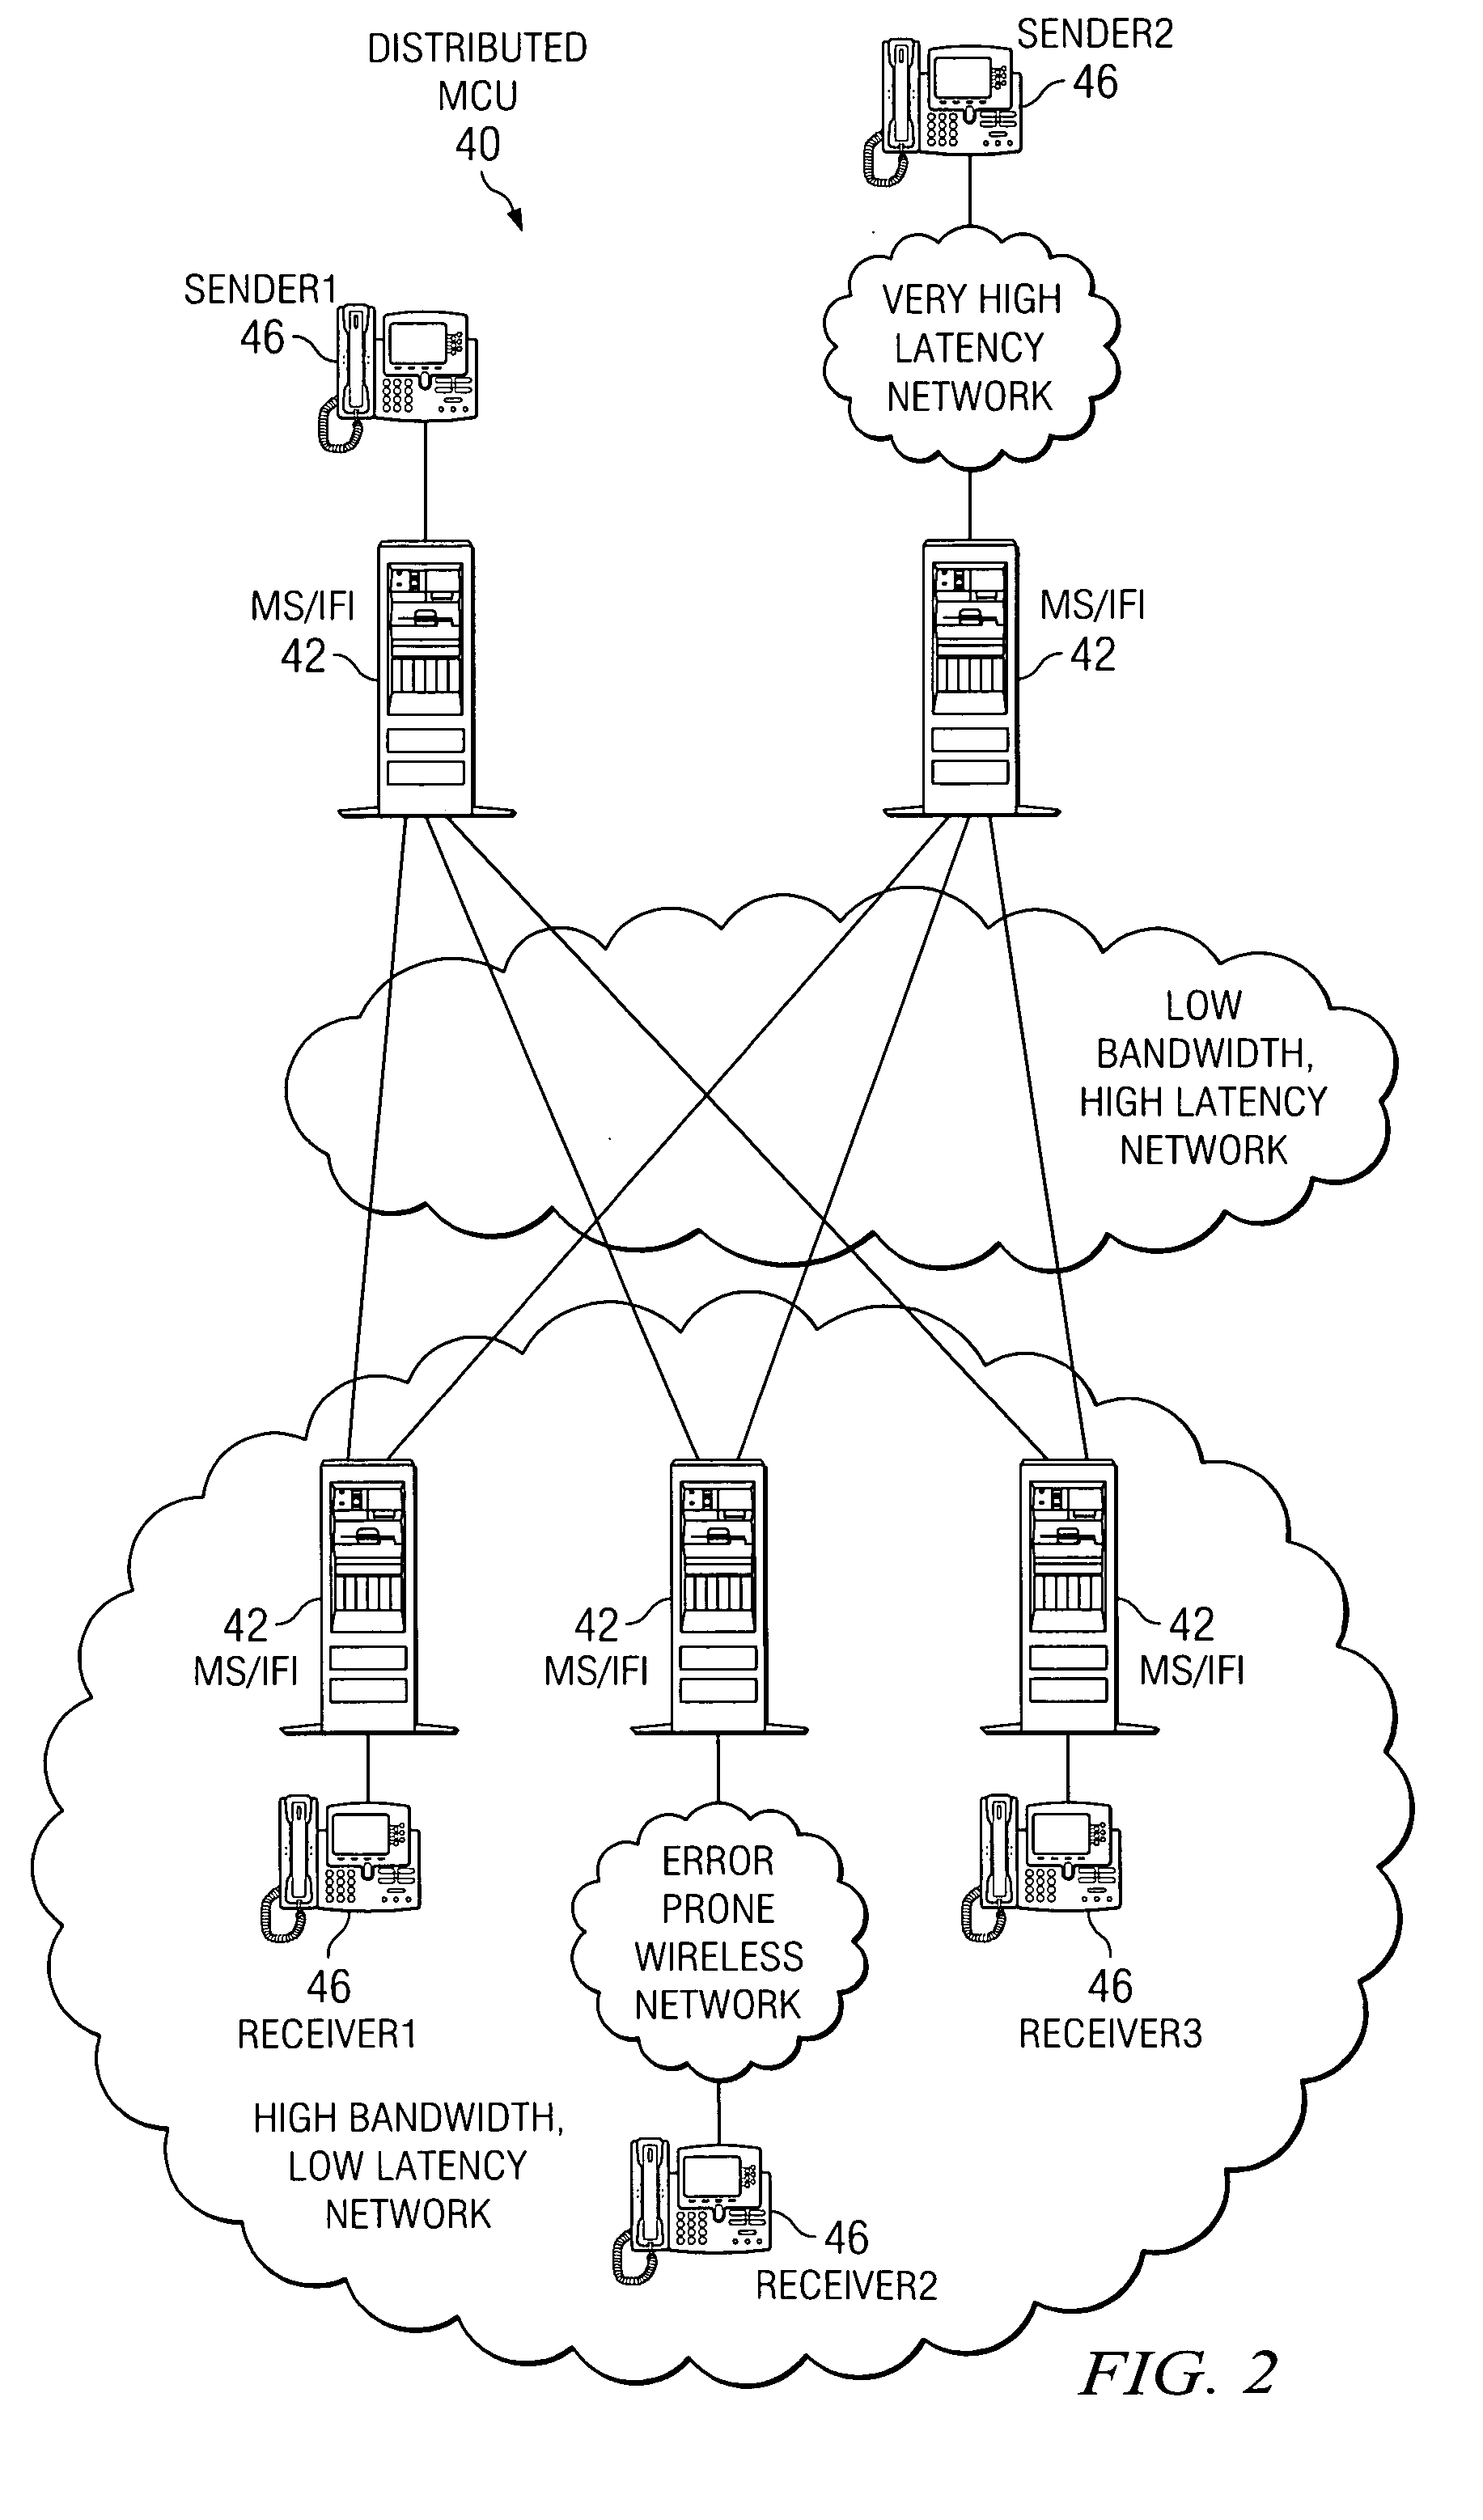 System and method for performing distributed multipoint video conferencing